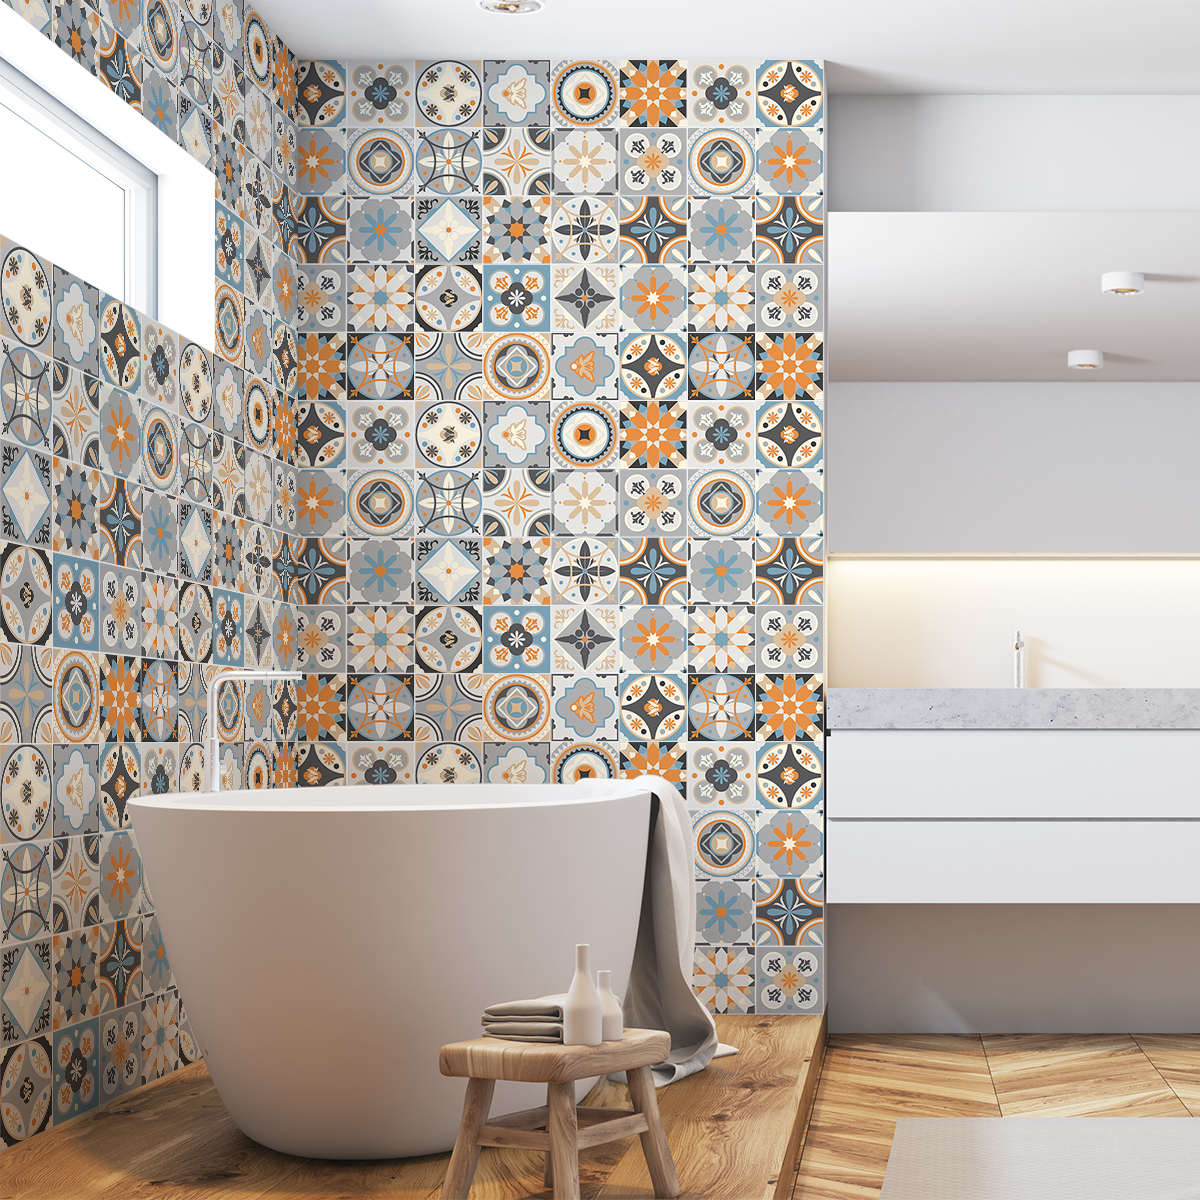 60 wall decal cement tiles azulejos pepita